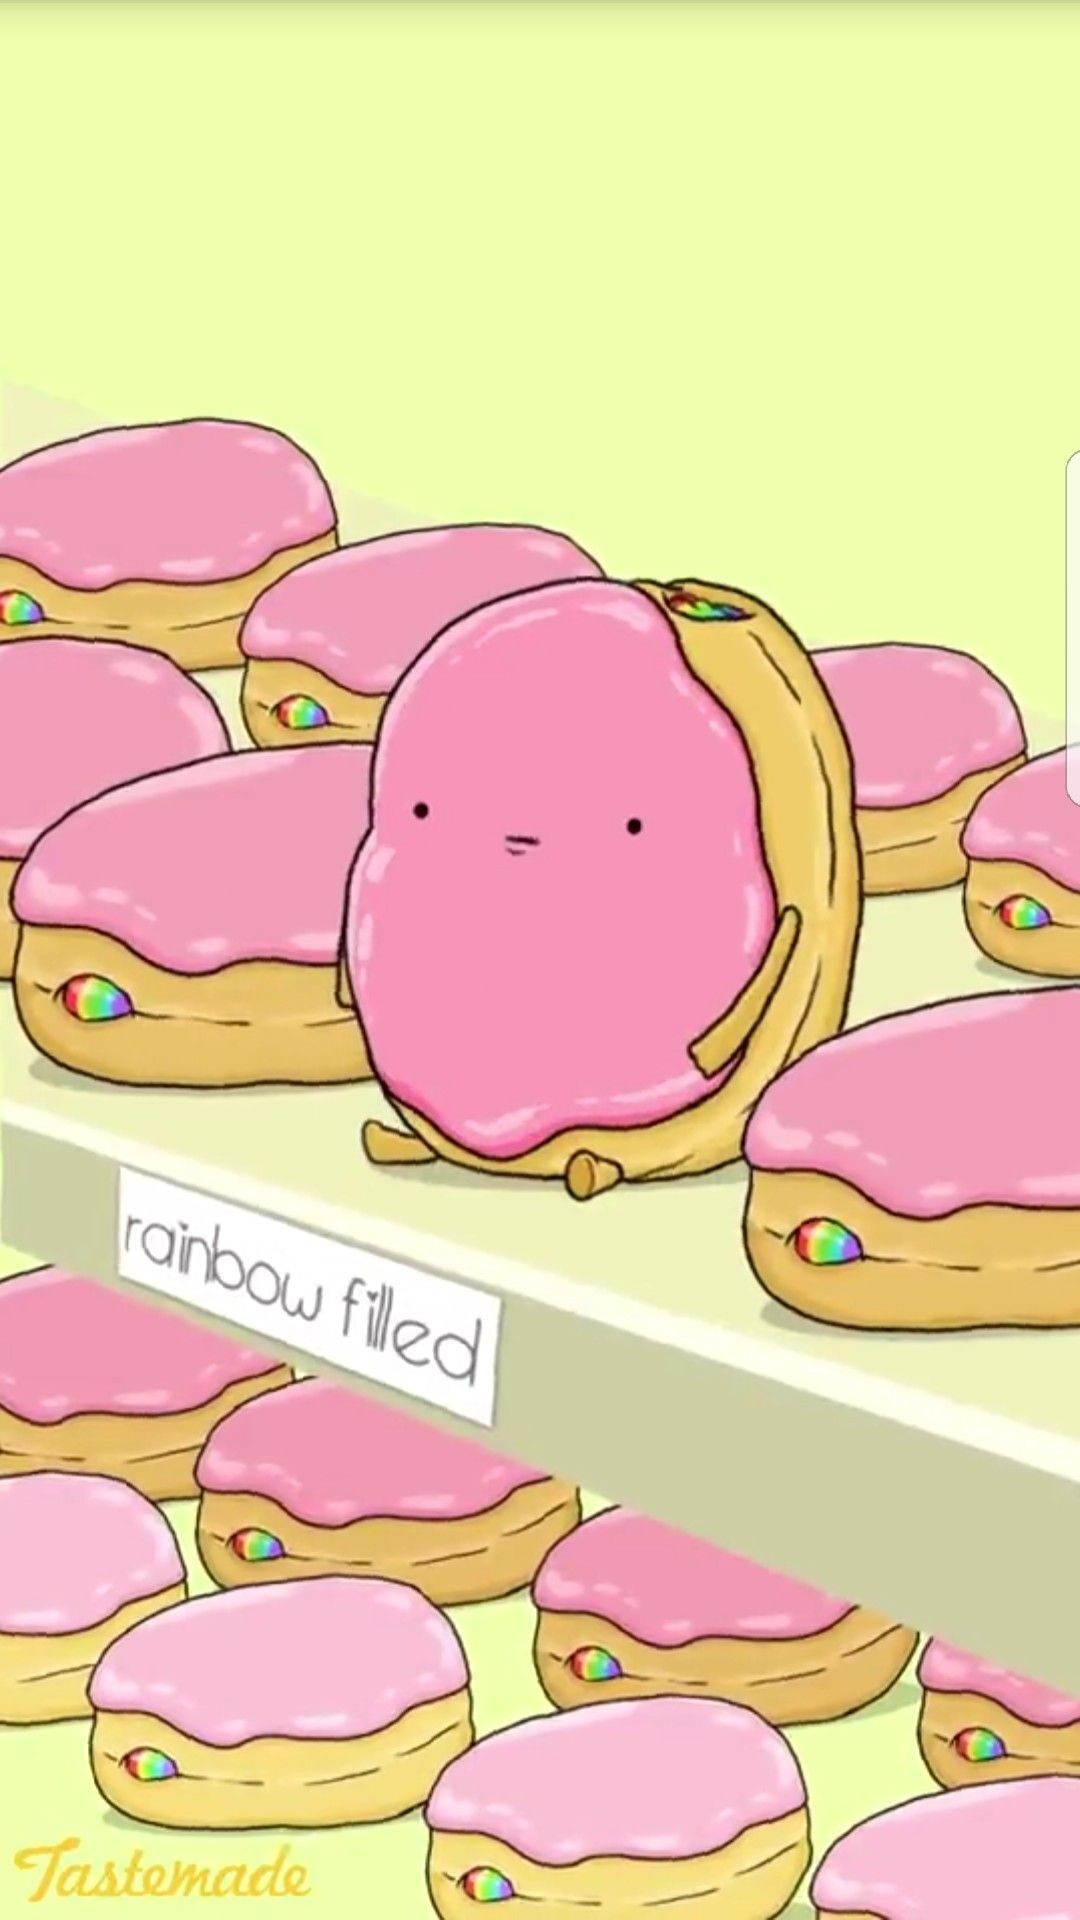 1080x1920 iPhone Wallpaper - Cute Jelly Filled Donuts Rainbow filling Pink & Green  Food Puns, Food